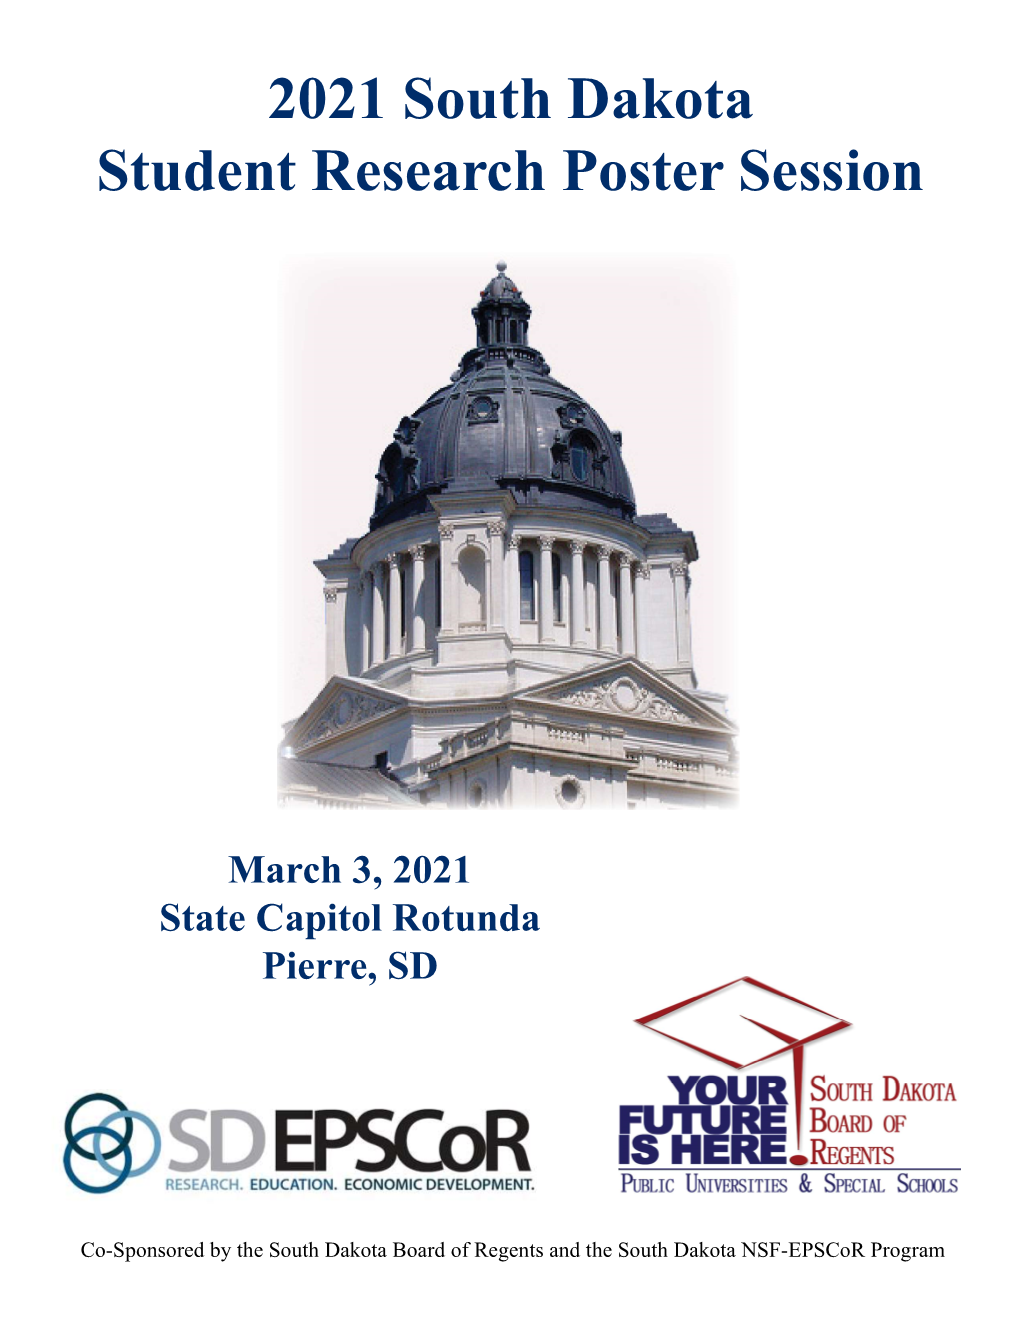 2021 South Dakota Student Research Poster Session